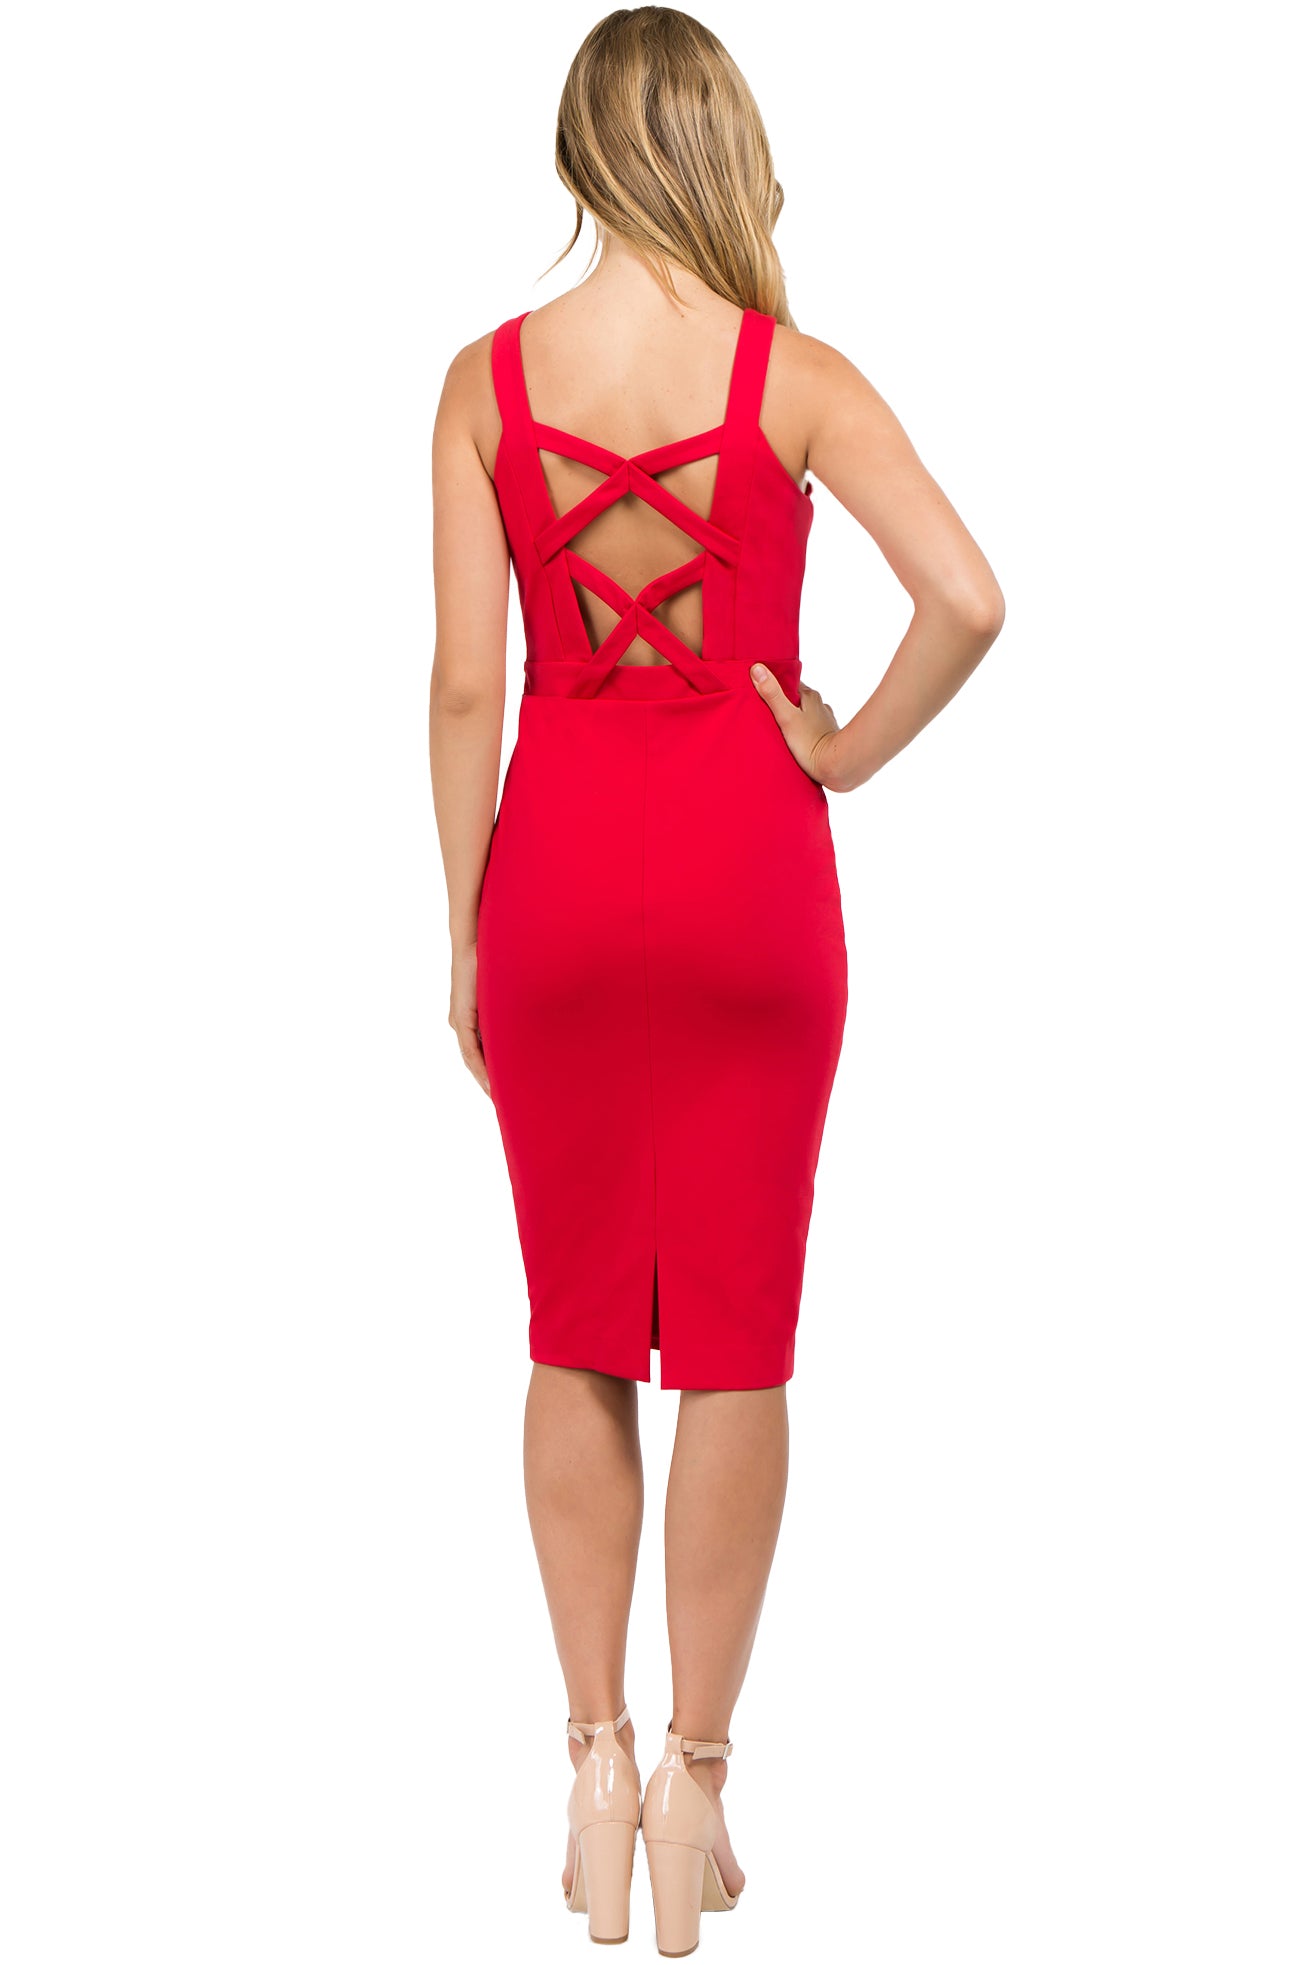 Back view of model wearing body con red stretch midi Ponte dress, with criss cross bands in back top.